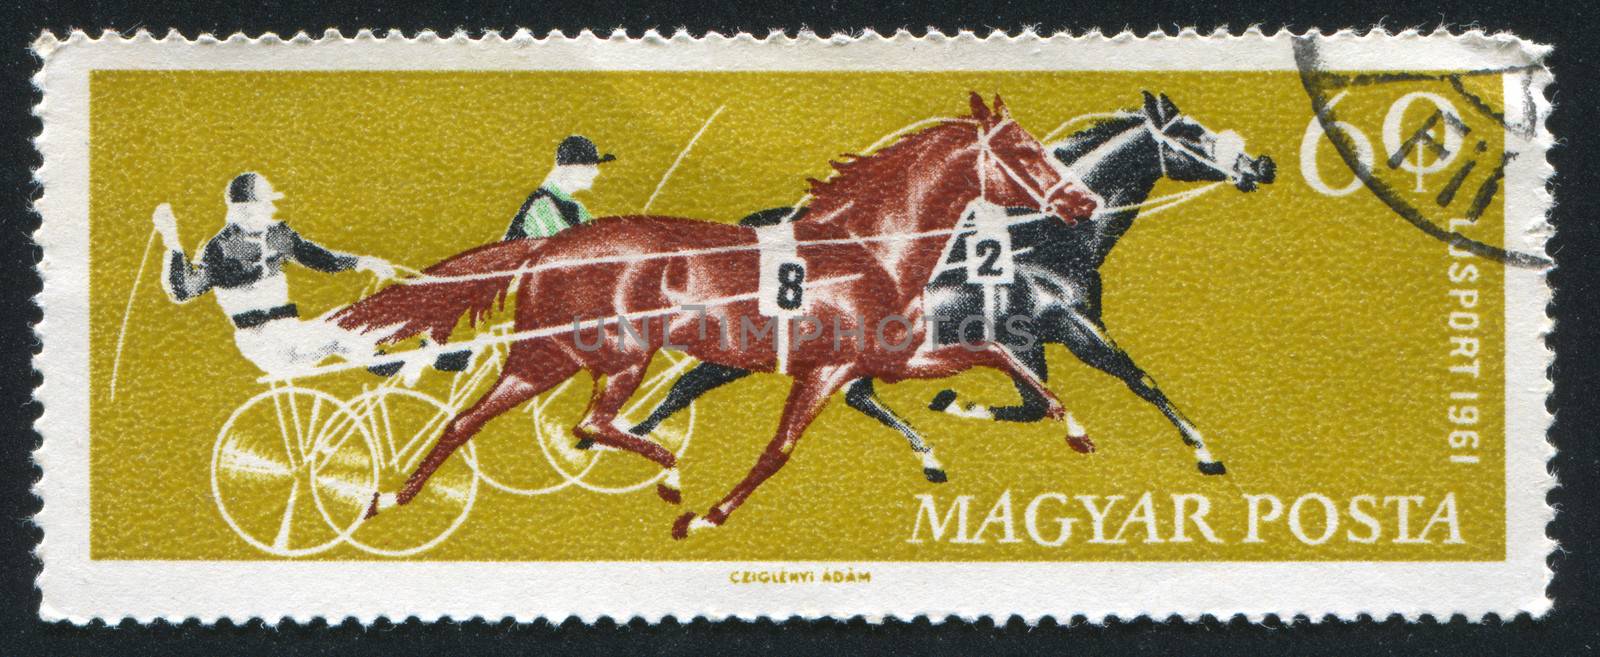 HUNGARY - CIRCA 1961: stamp printed by Hungary, shows Two trotters, circa 1961